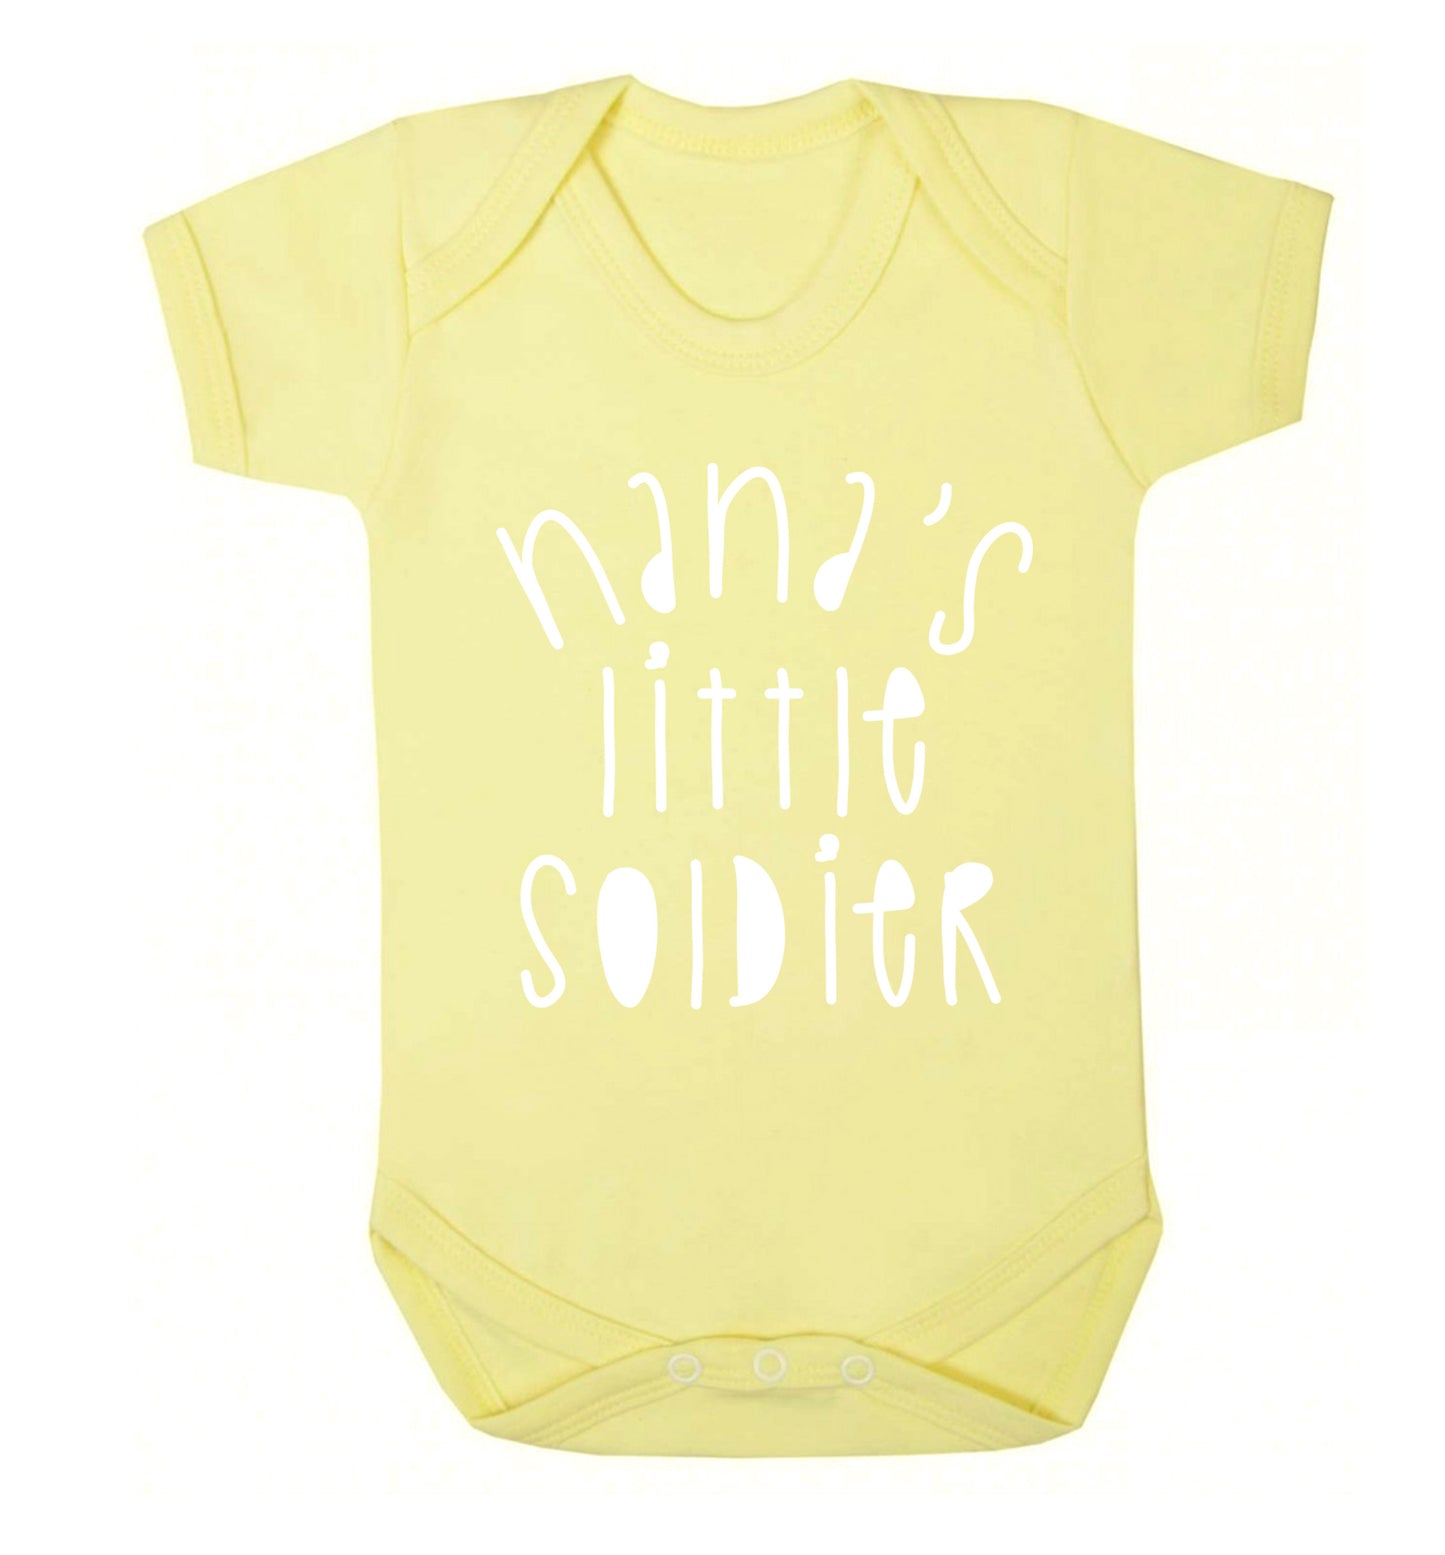 Nana's little soldier Baby Vest pale yellow 18-24 months